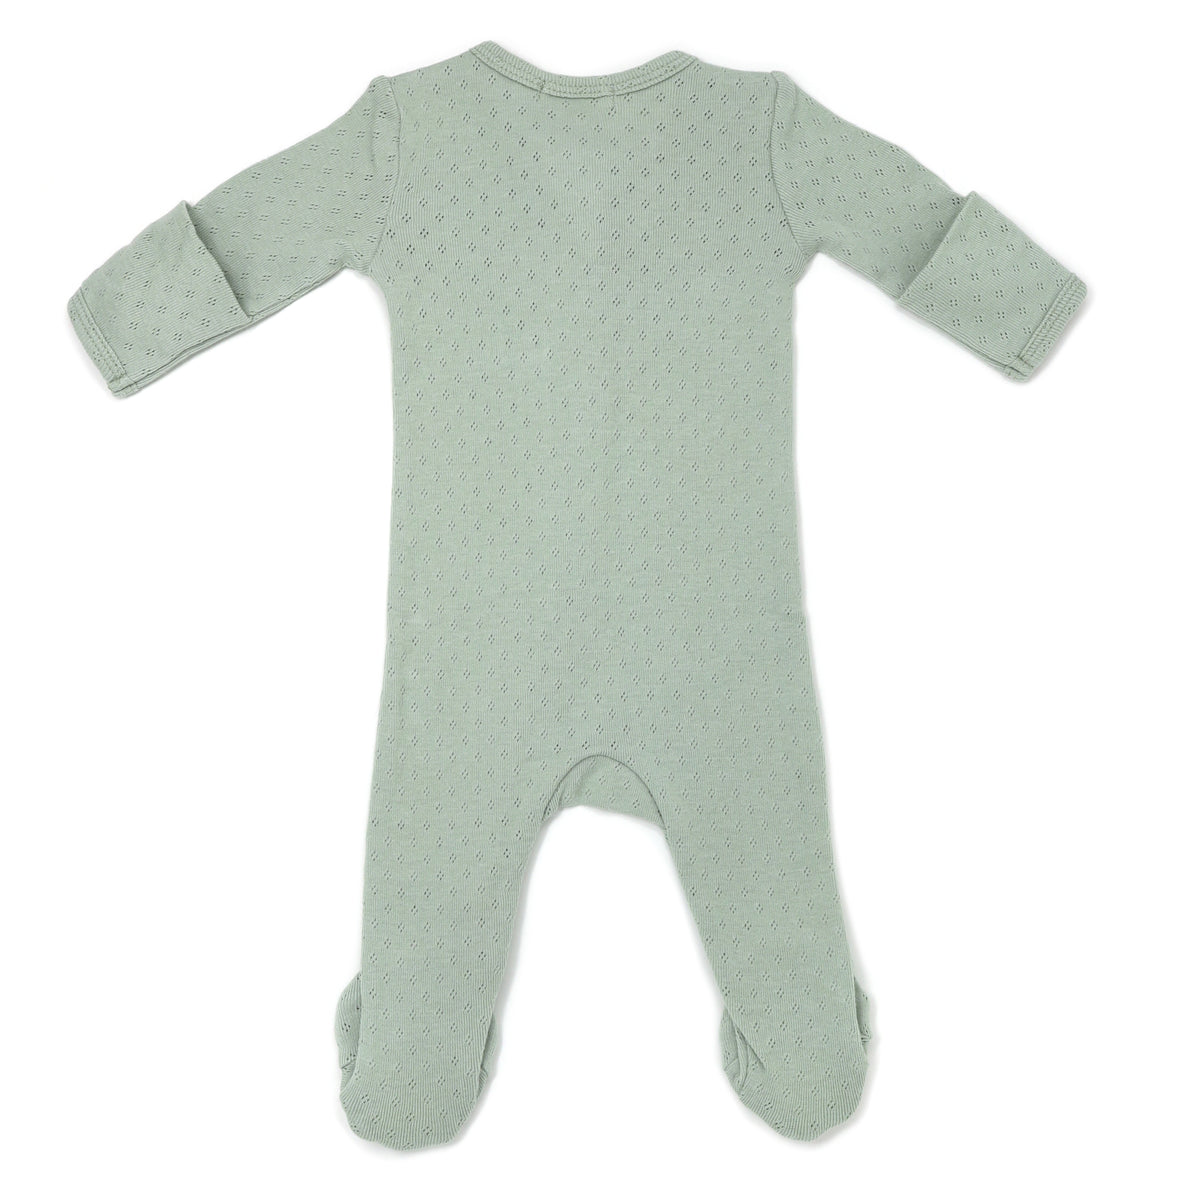 oh baby! Two Way Zipper Footie - Pointelle - Sage